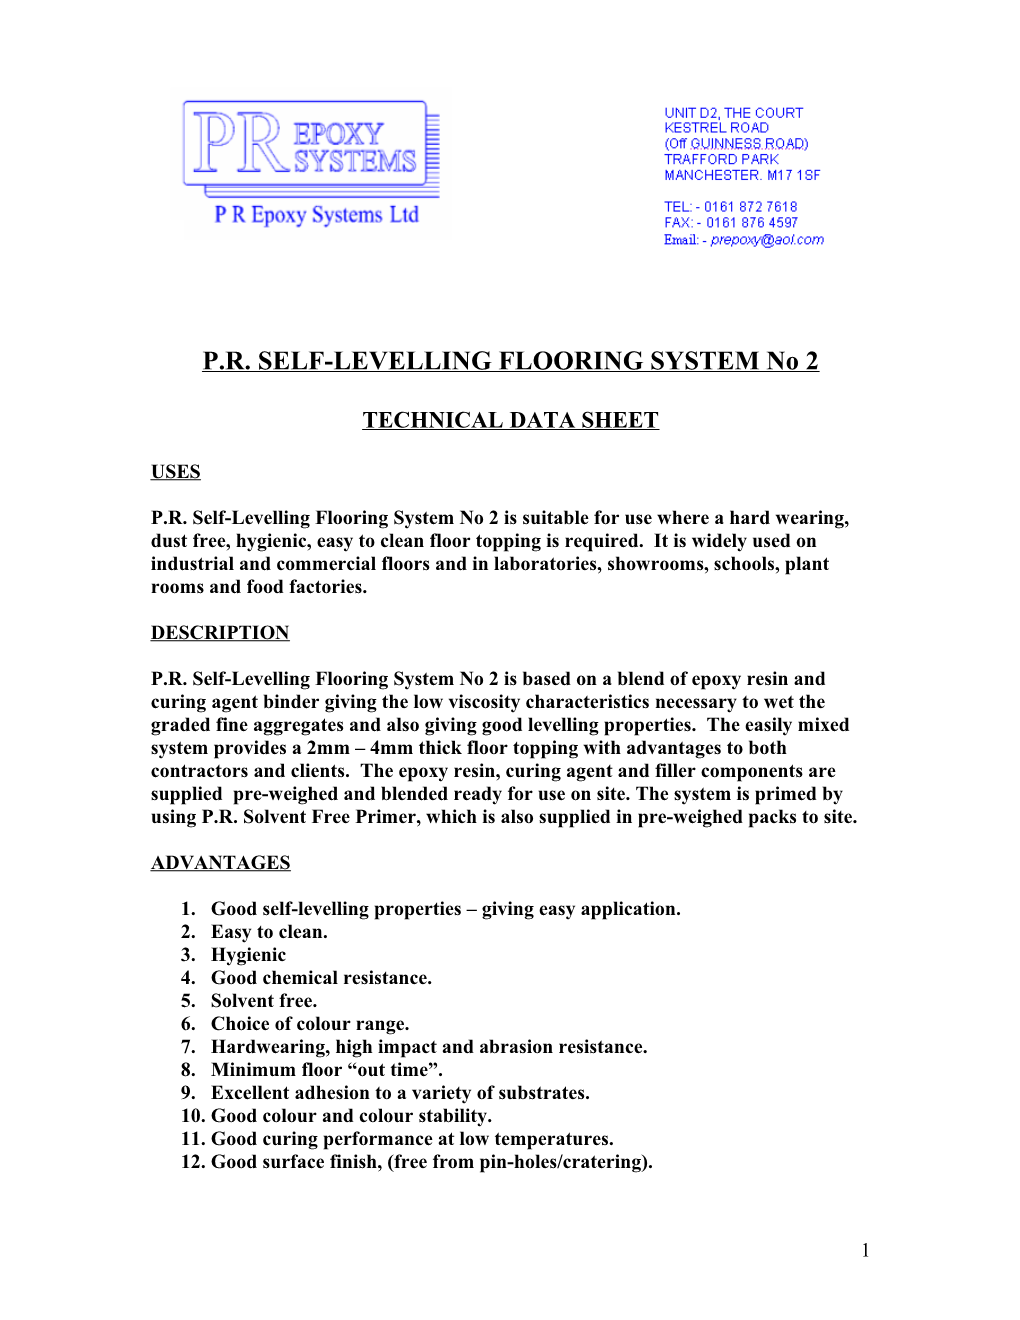 P.R. SELF-LEVELLING FLOORING SYSTEM No 2